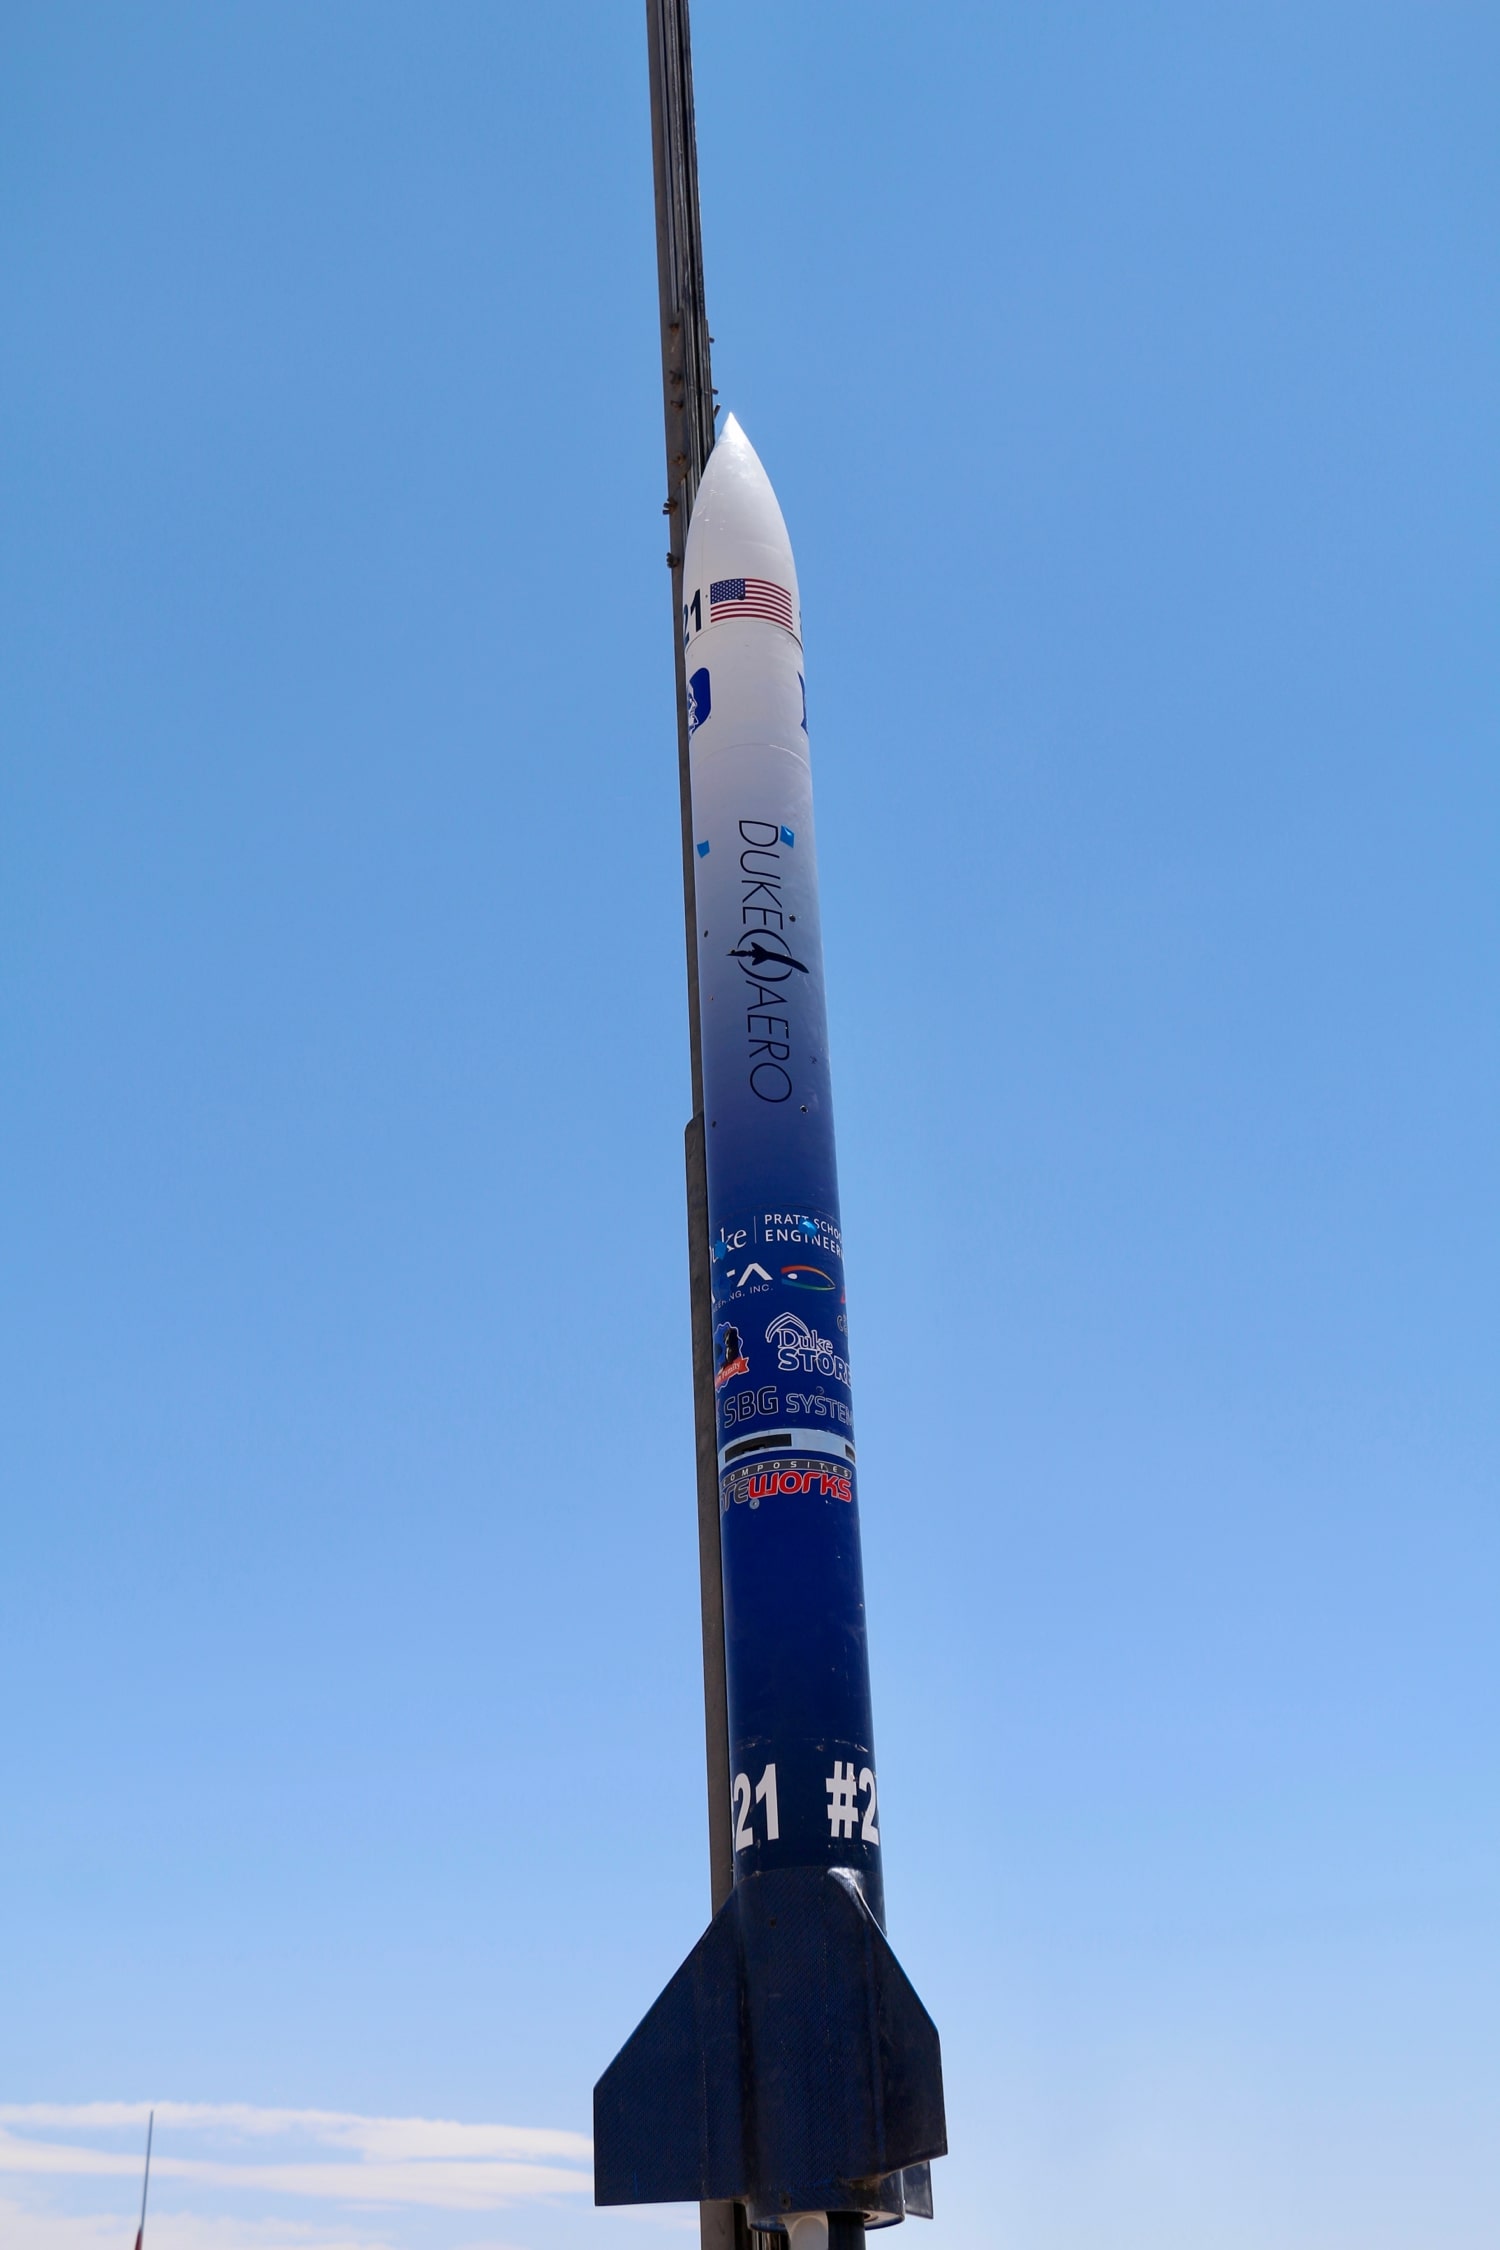 image of rocket on the launch rail, contrasted against the sky